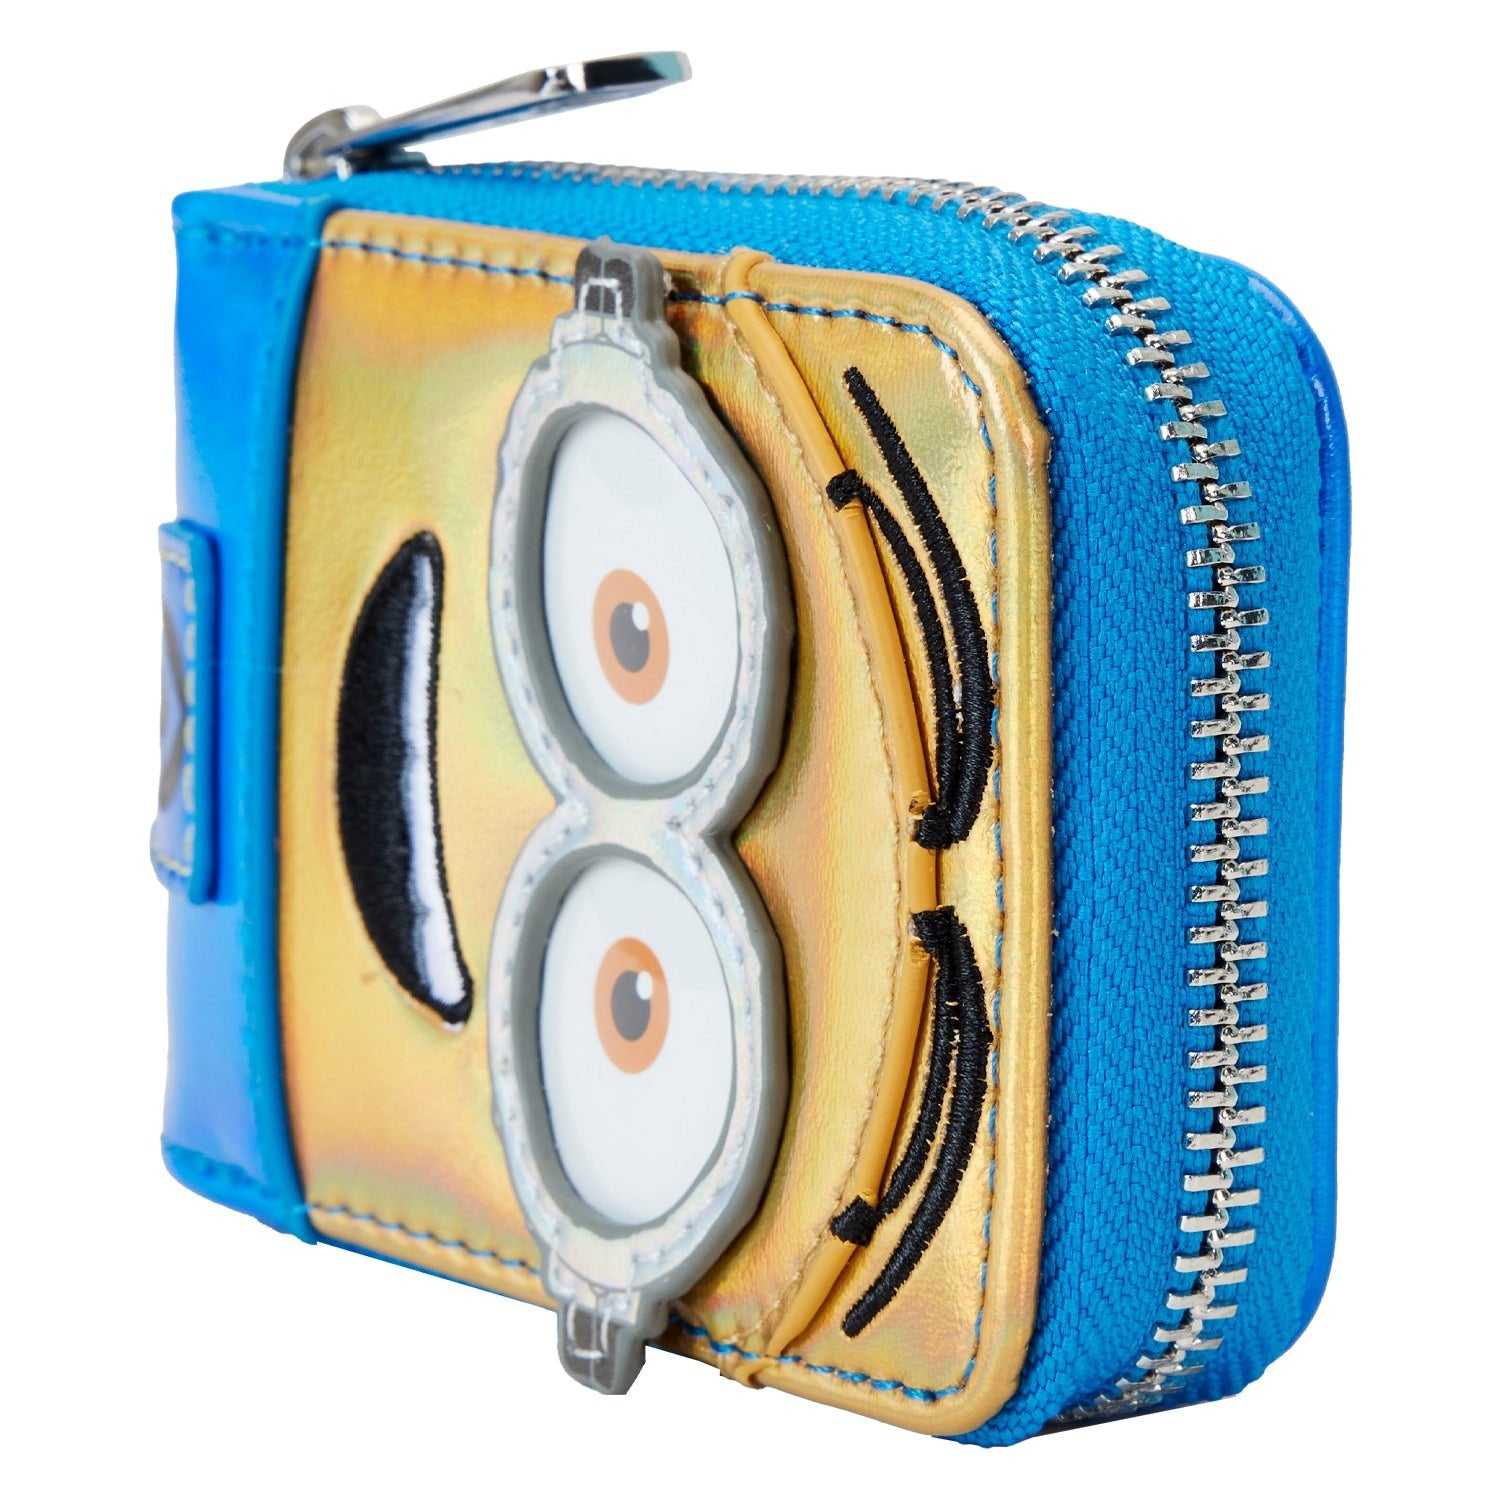 Loungefly x Despicable Me Minion Accordion Wallet - GeekCore